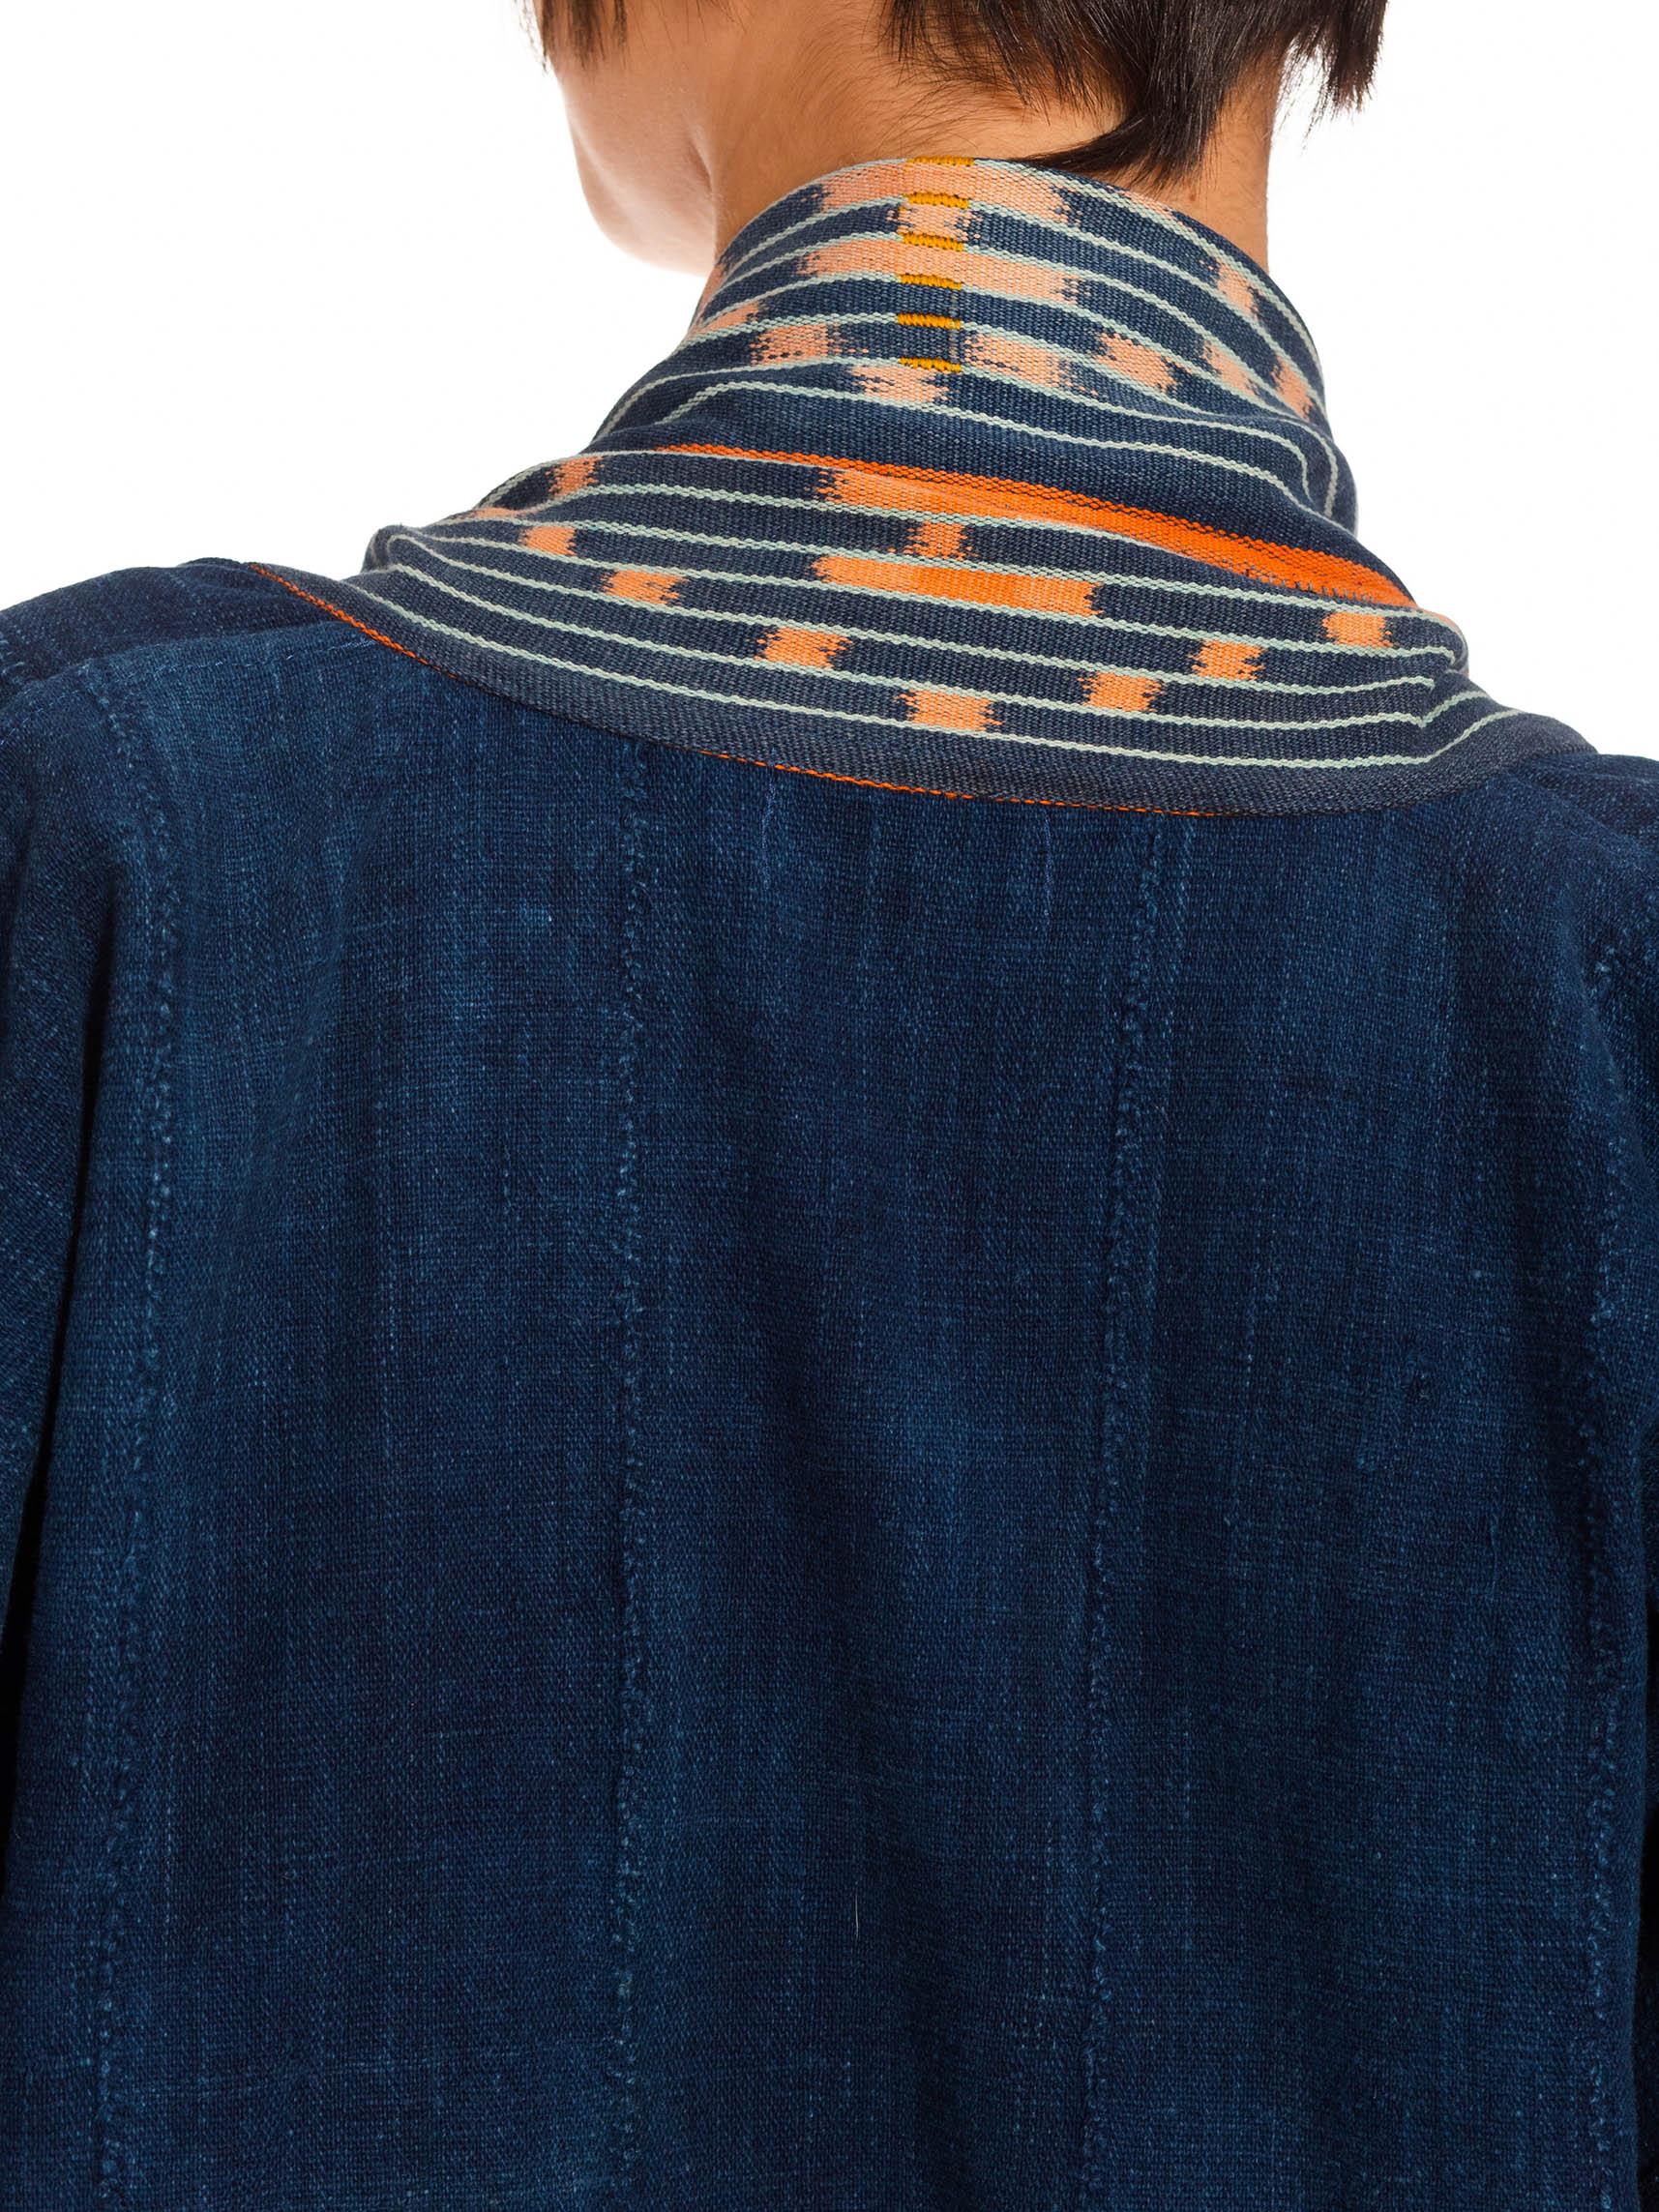 Morphew Collection Blue & Orange Cotton Up-Cycled Vintage Fabrics African Indig For Sale 4